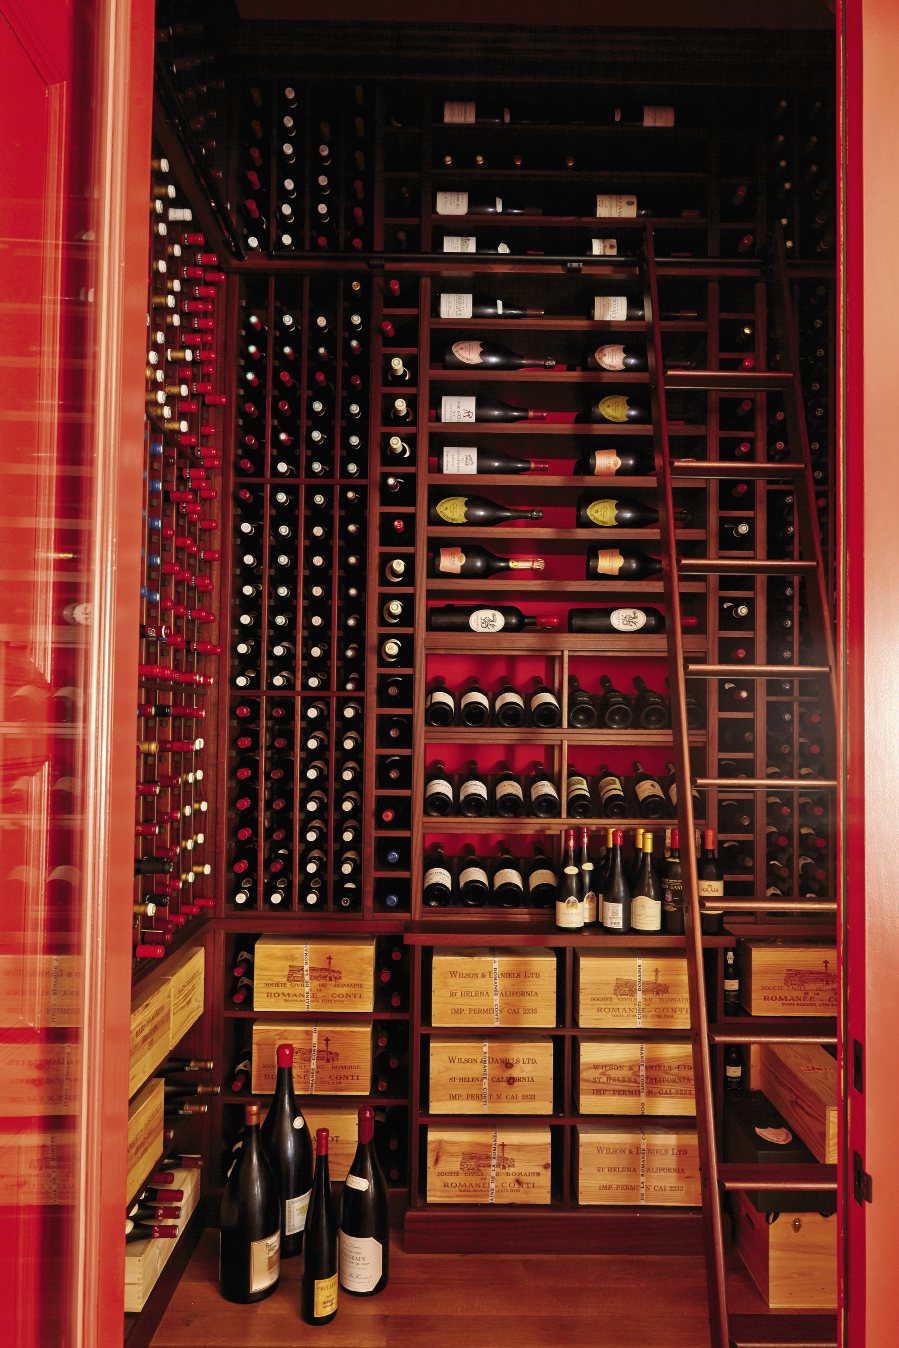 Stephen’s prized wine collection is both showcased and handy.